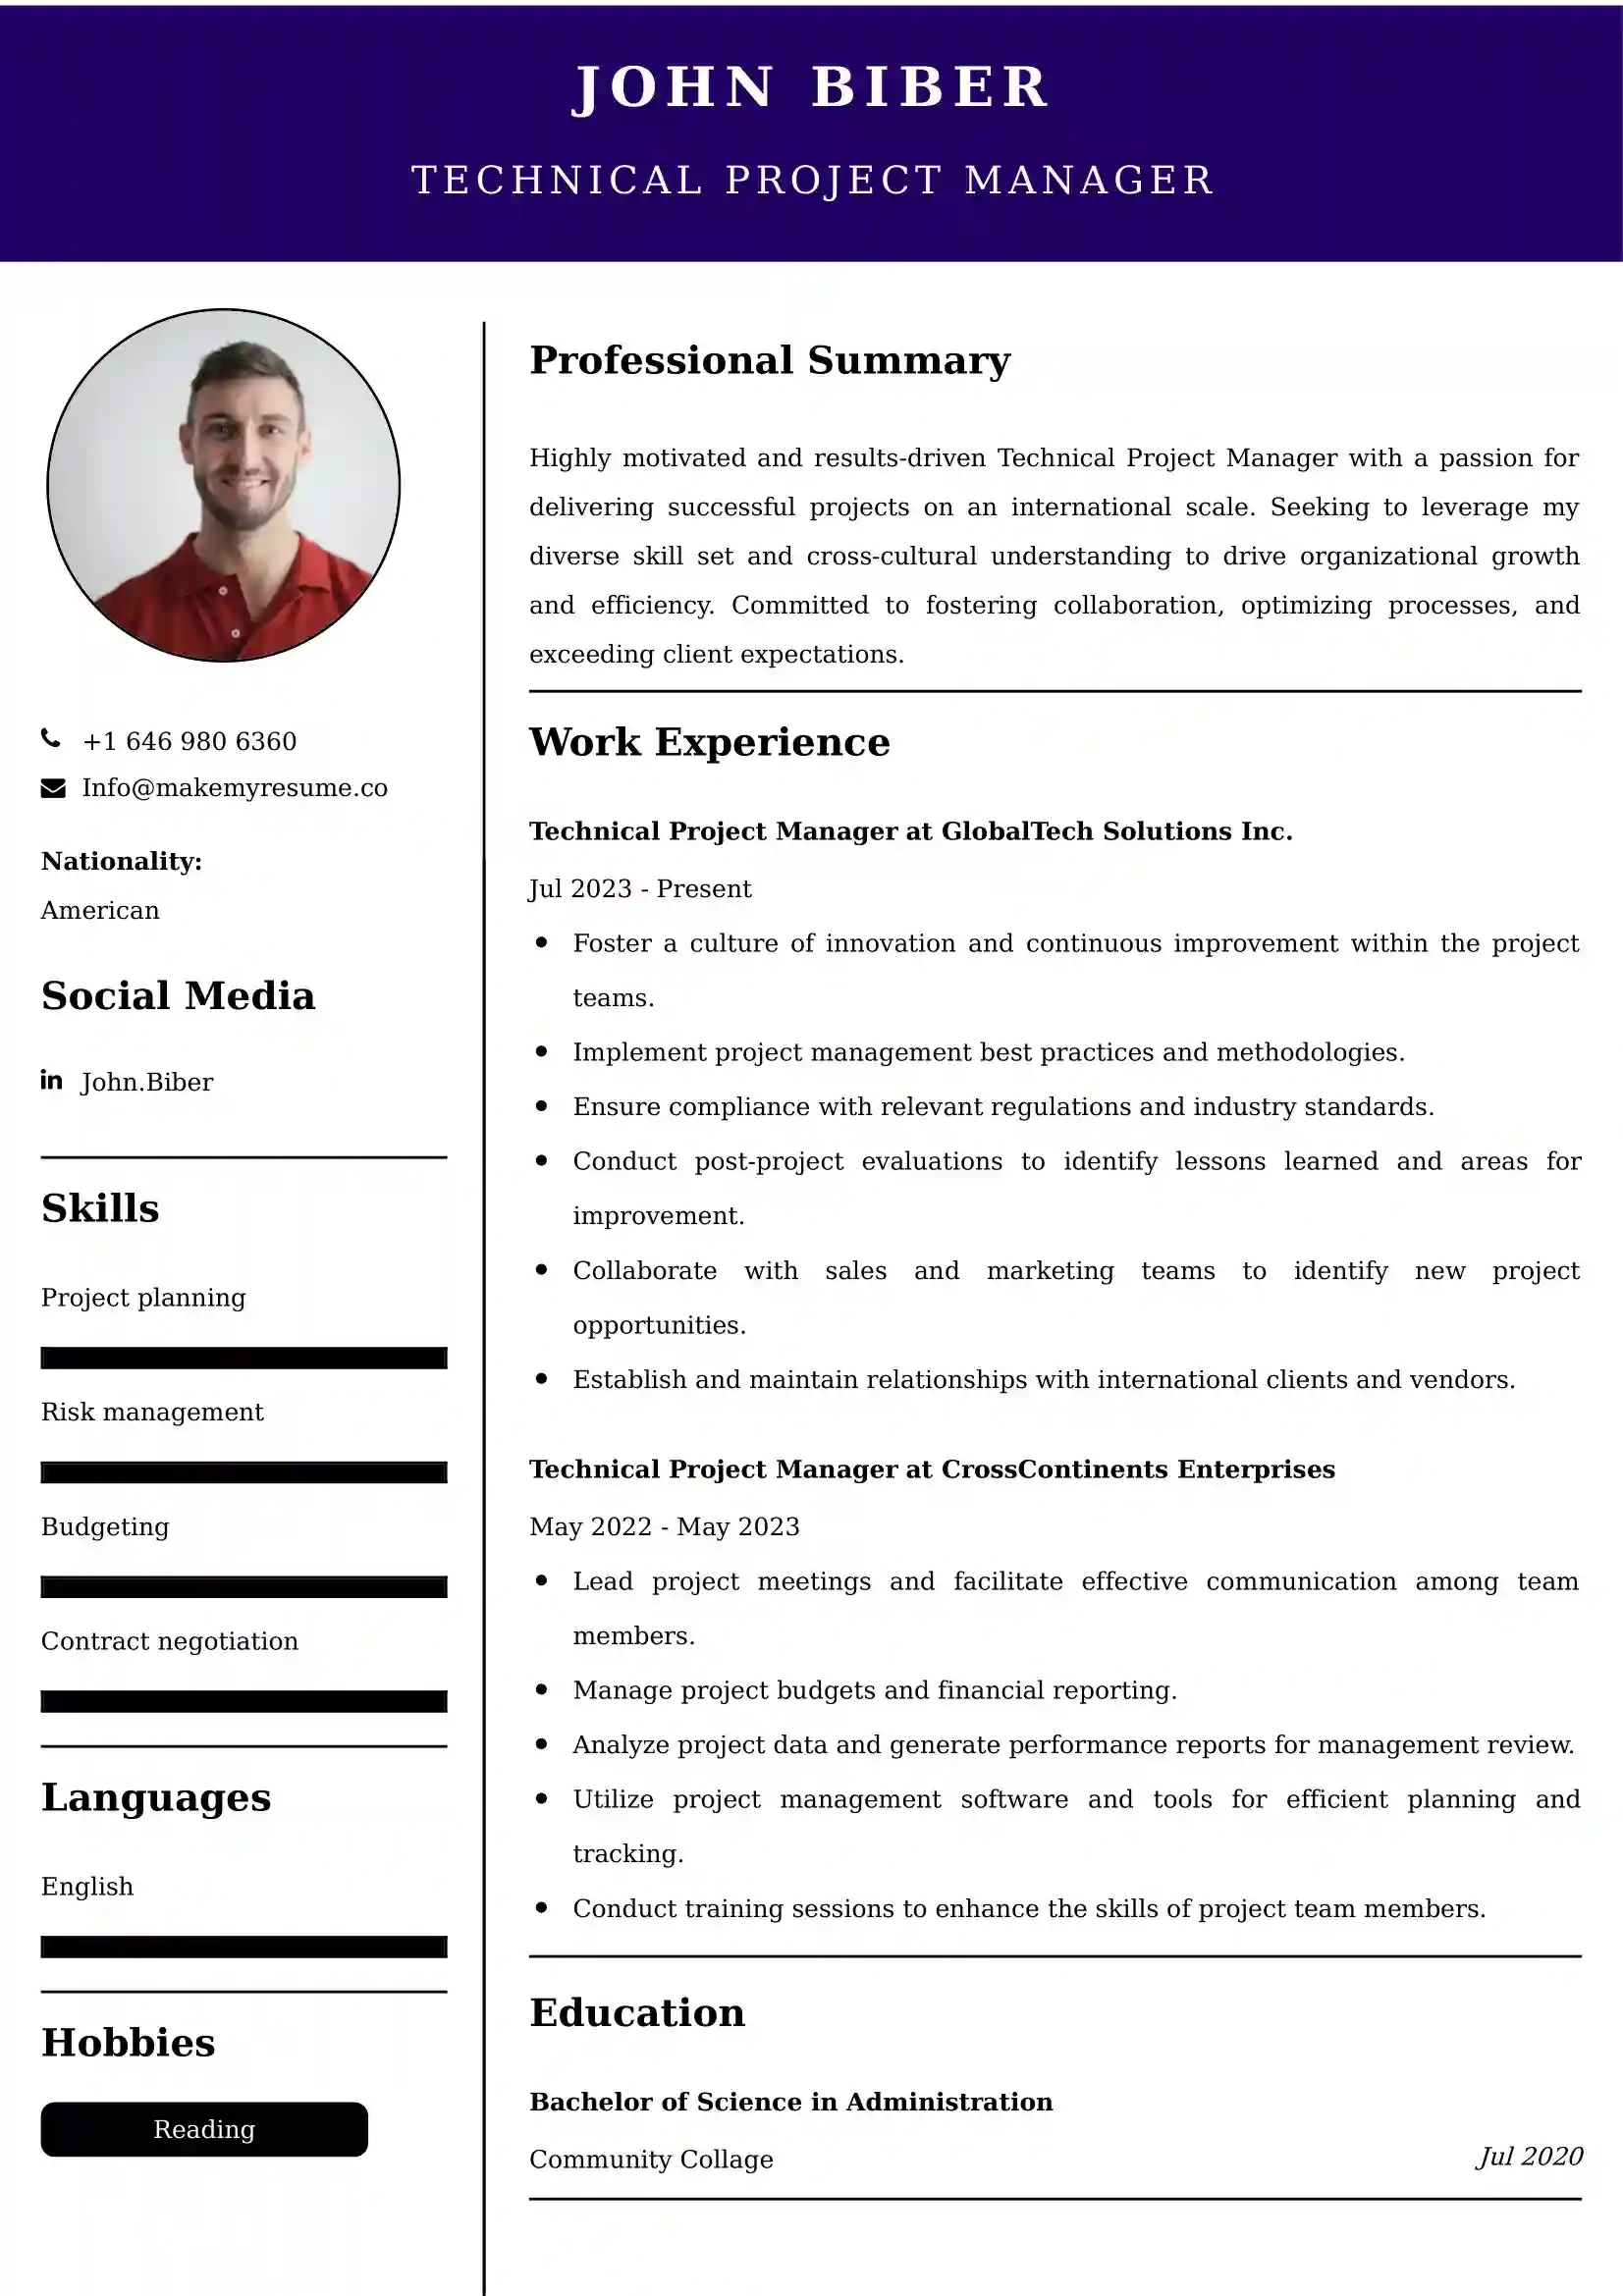 Technical Project Manager Resume Examples for UK Jobs - Tips and Guide